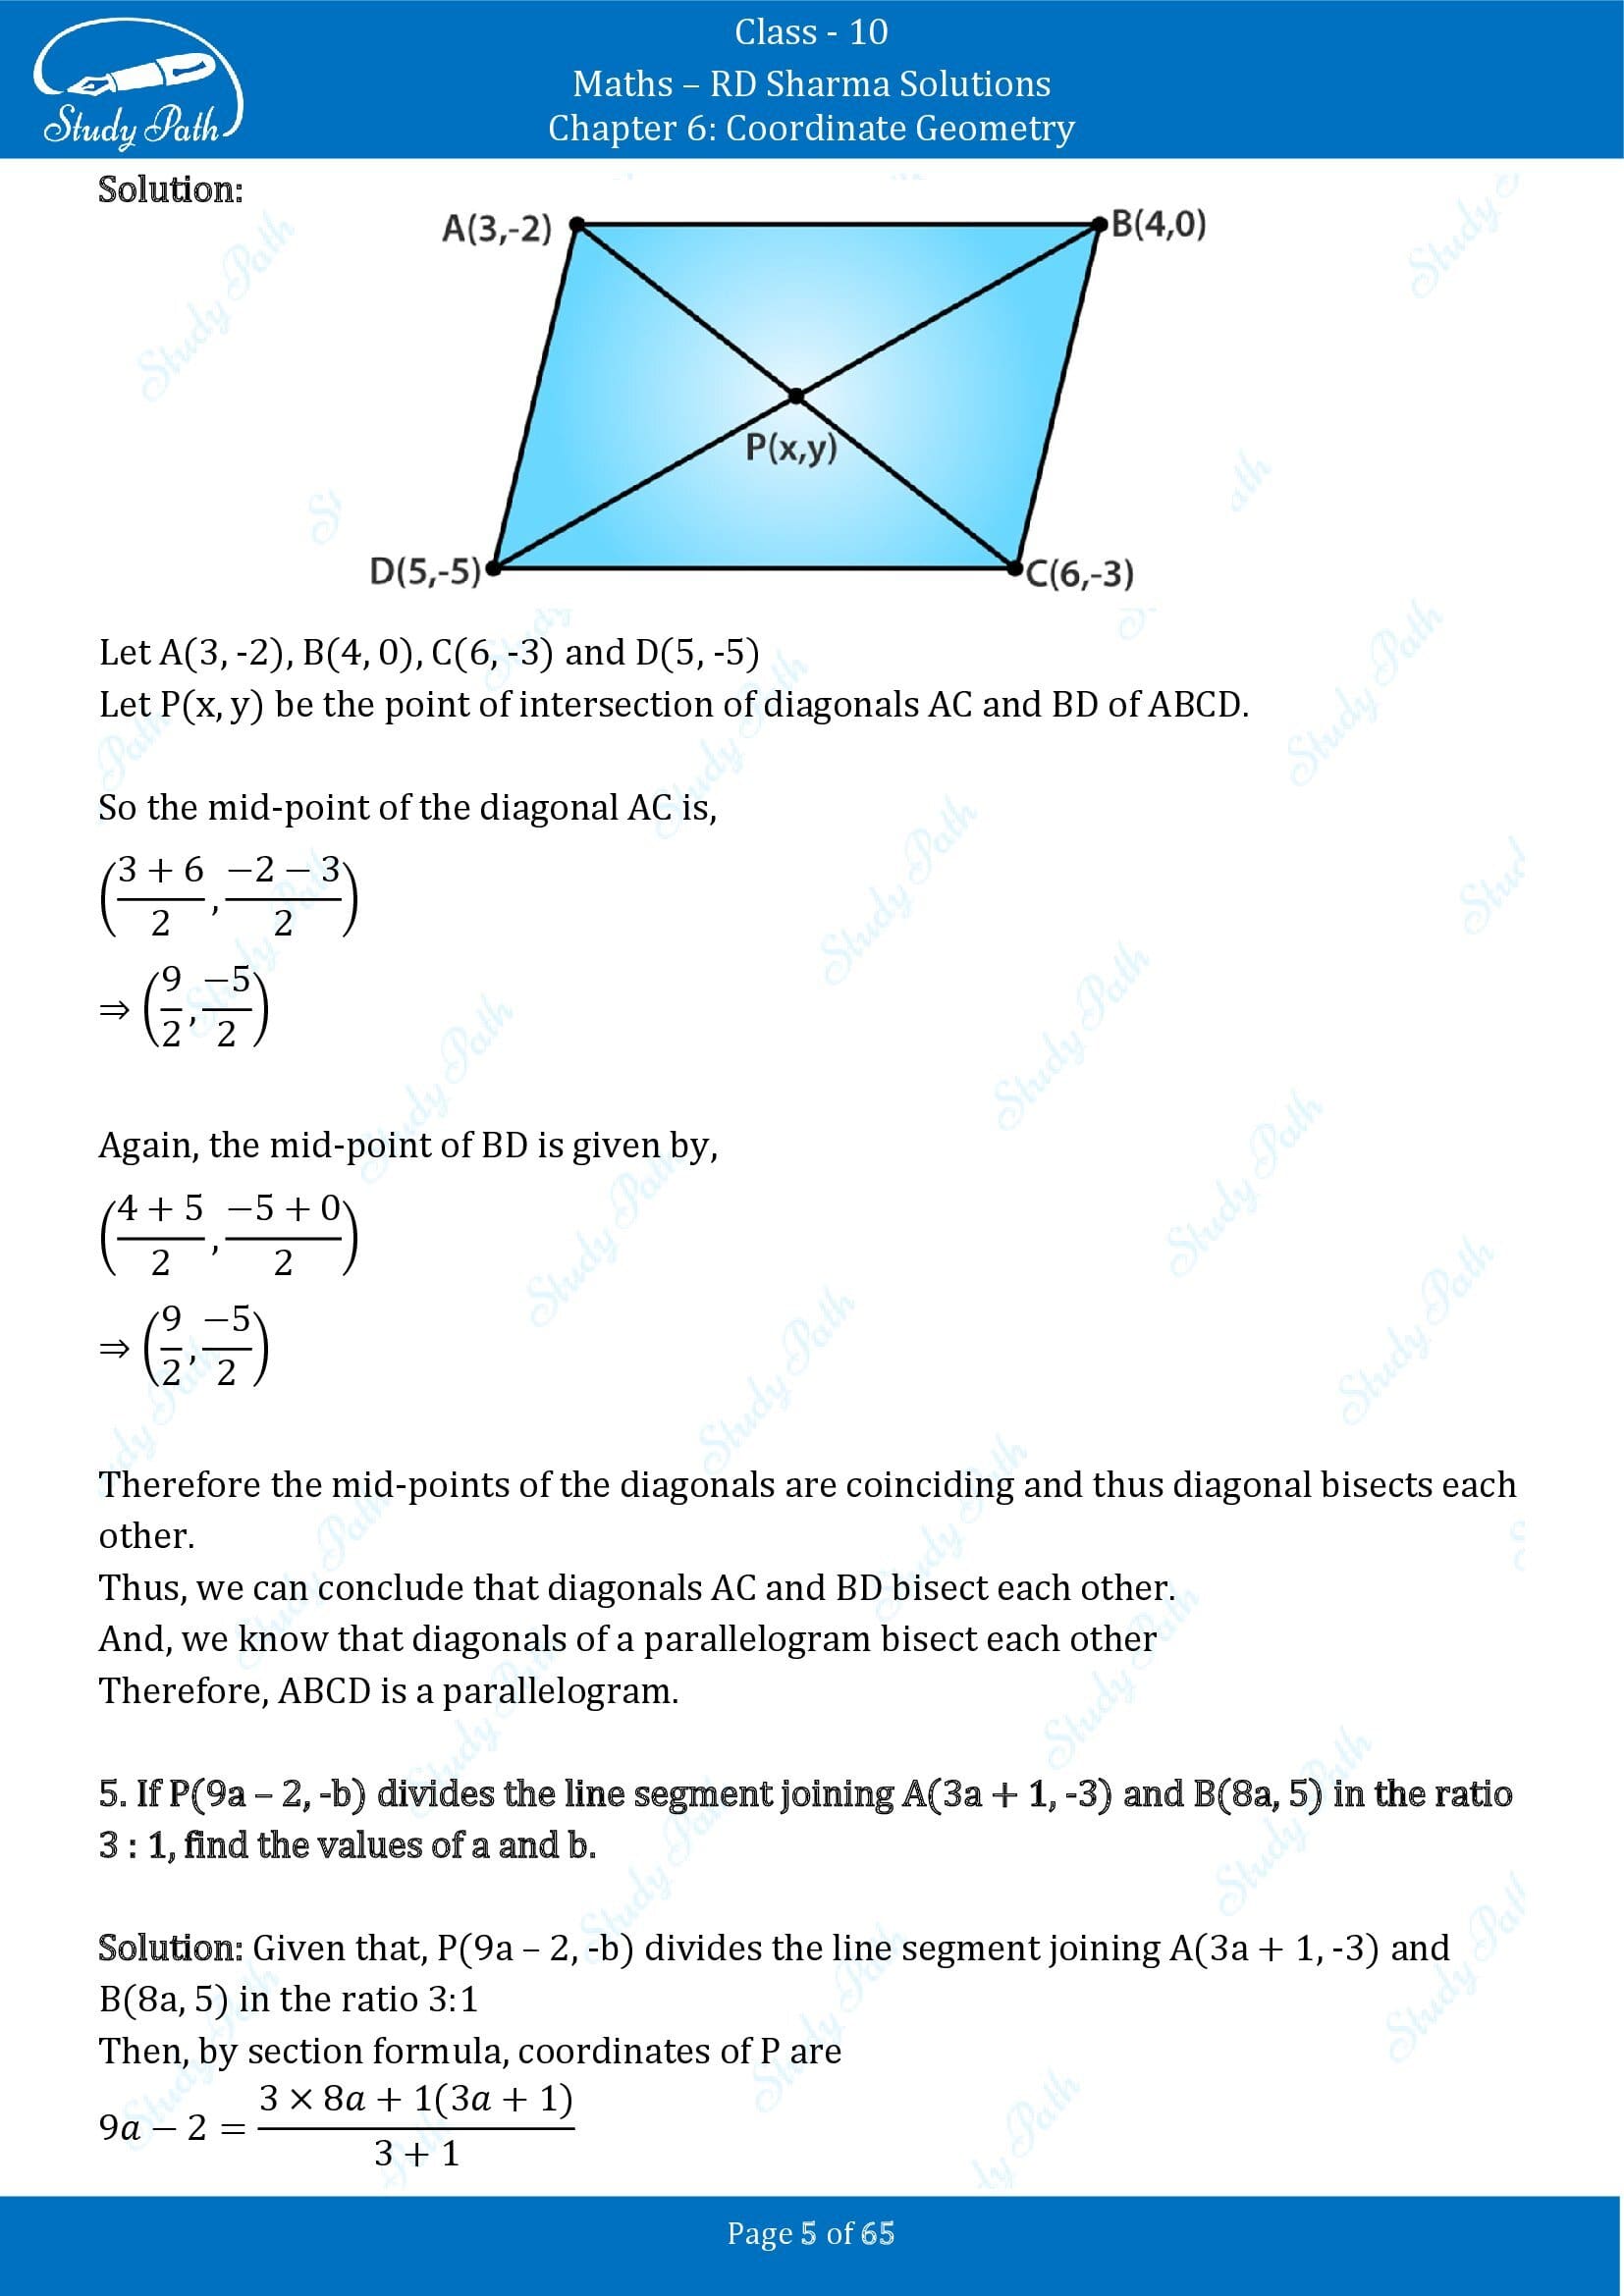 RD Sharma Solutions Class 10 Chapter 6 Coordinate Geometry Exercise 6.3 00005